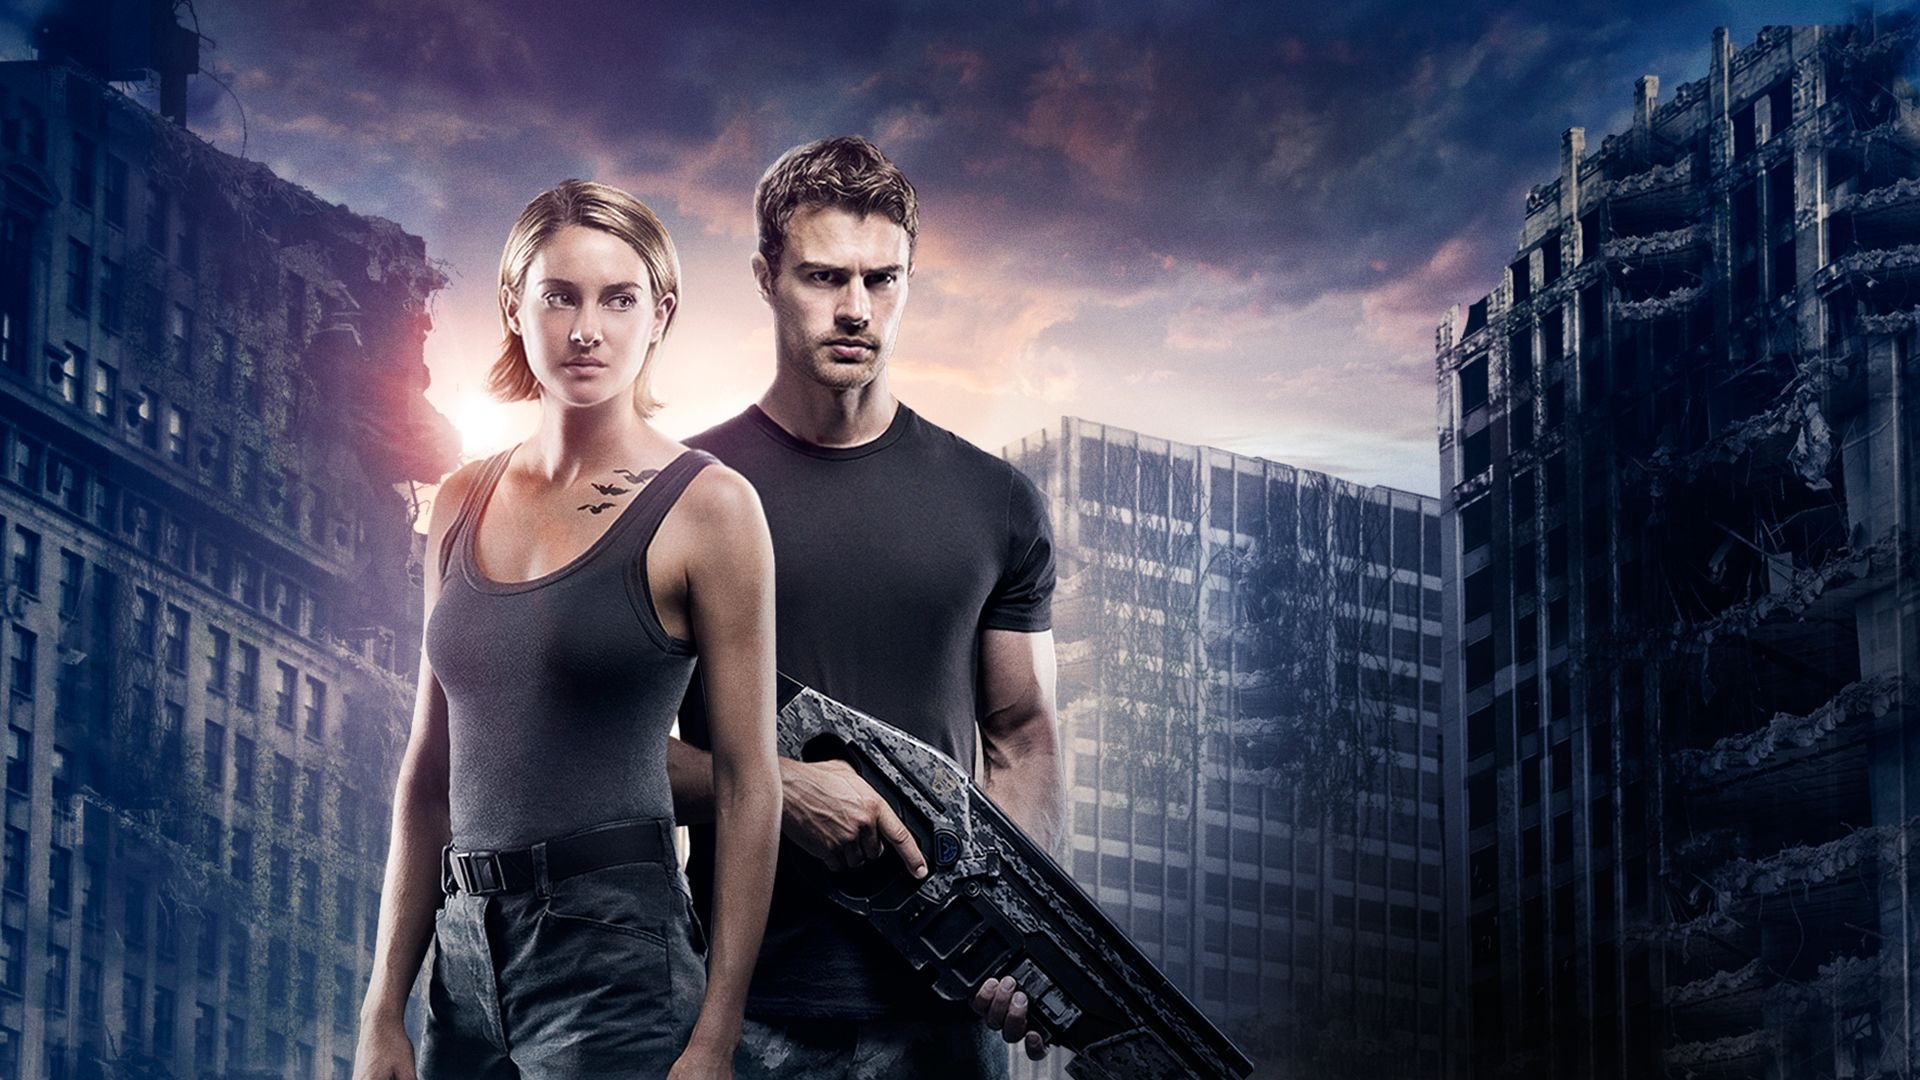 Divergent, Abnegation, Movies, Quotes, 1920x1080 Full HD Desktop